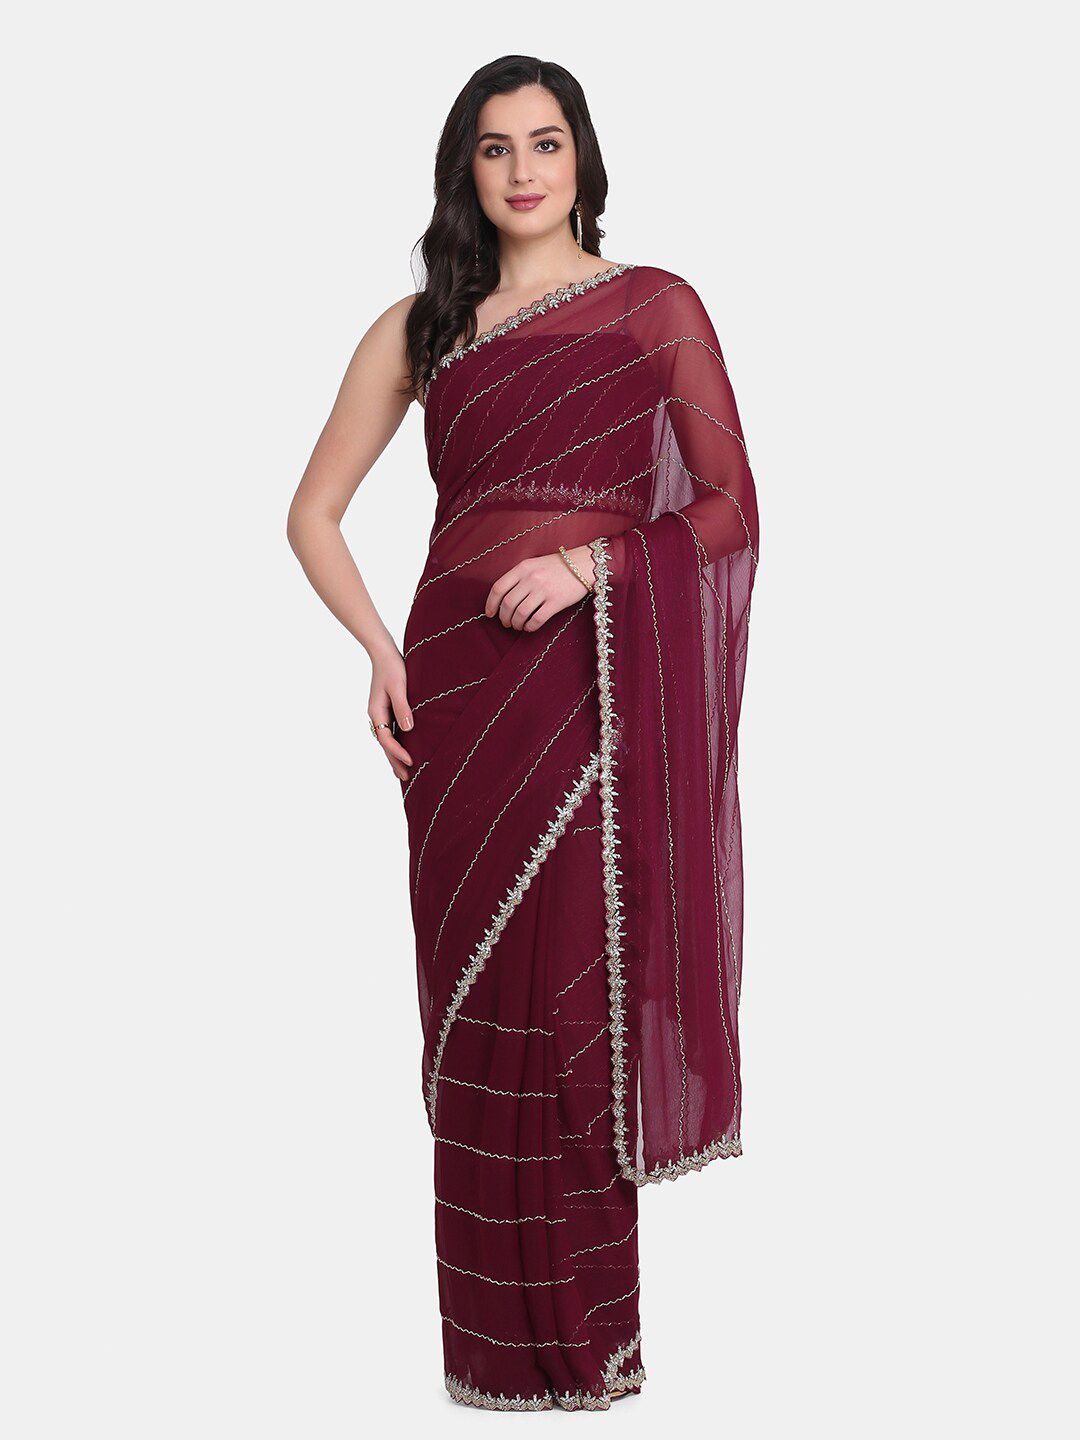 BOMBAY SELECTIONS Burgundy Embellished Organza Saree Price in India